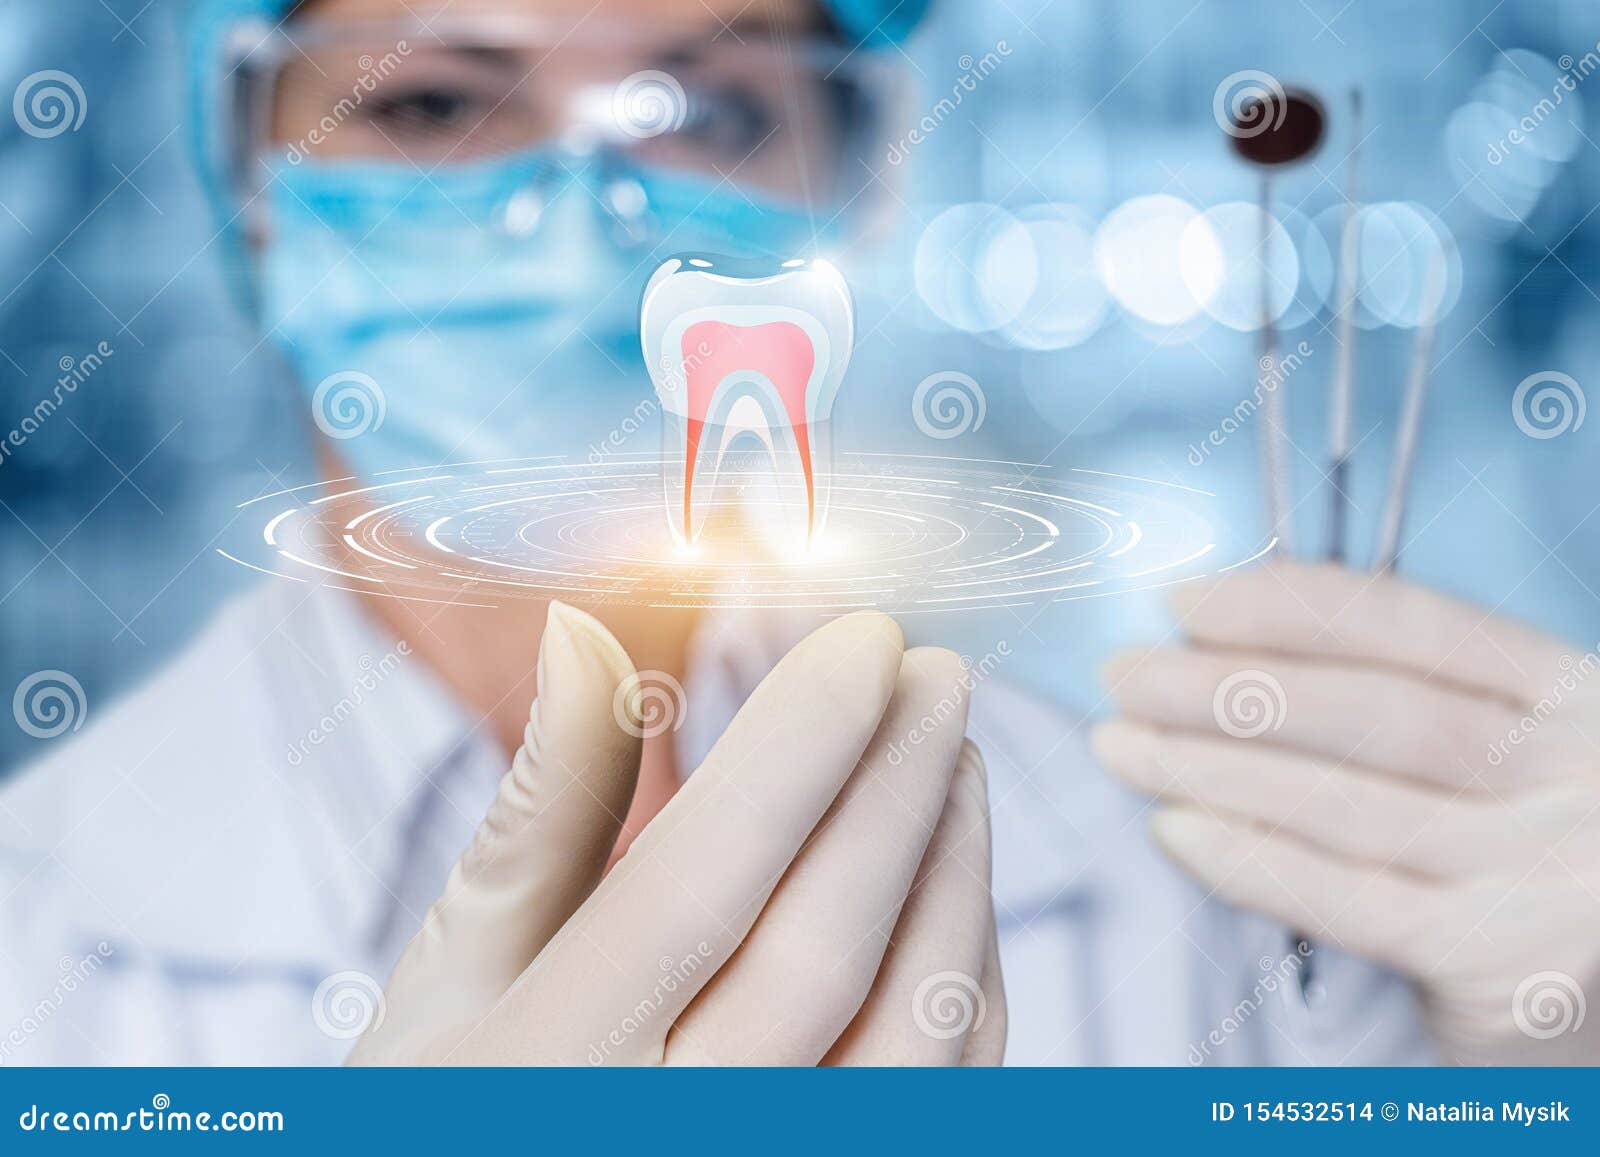 the concept of dental treatment